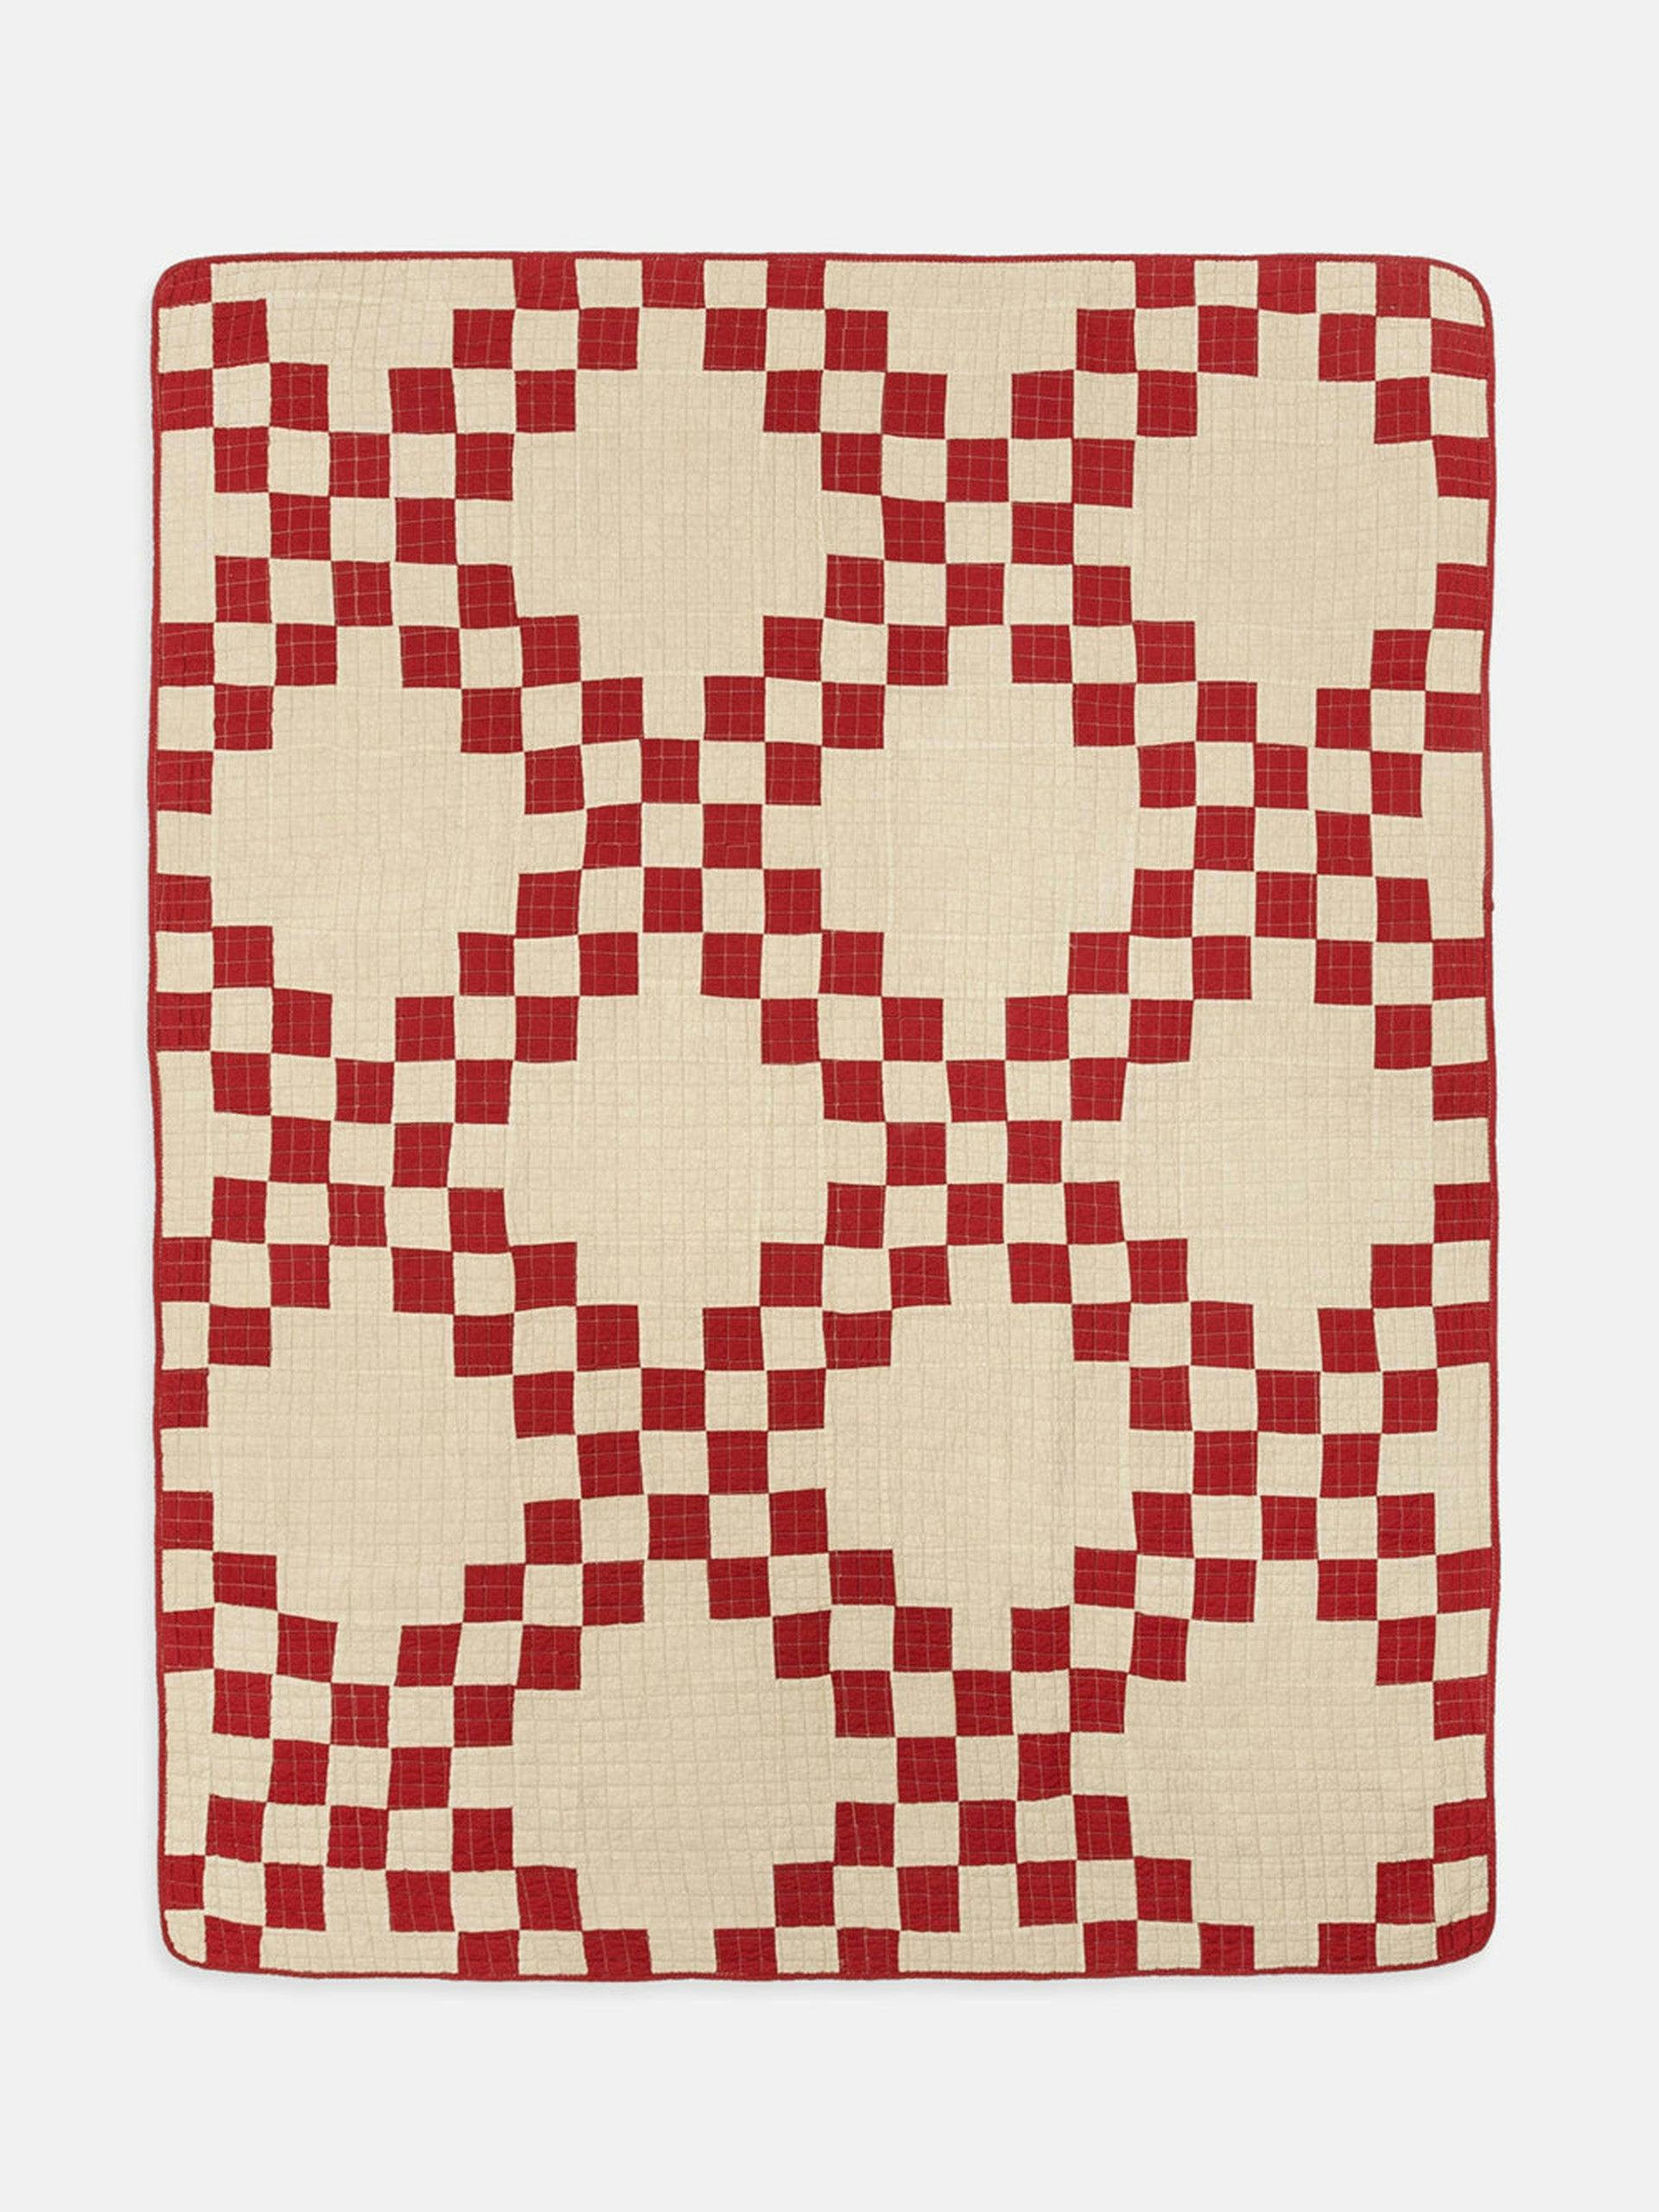 Patchwork red quilt